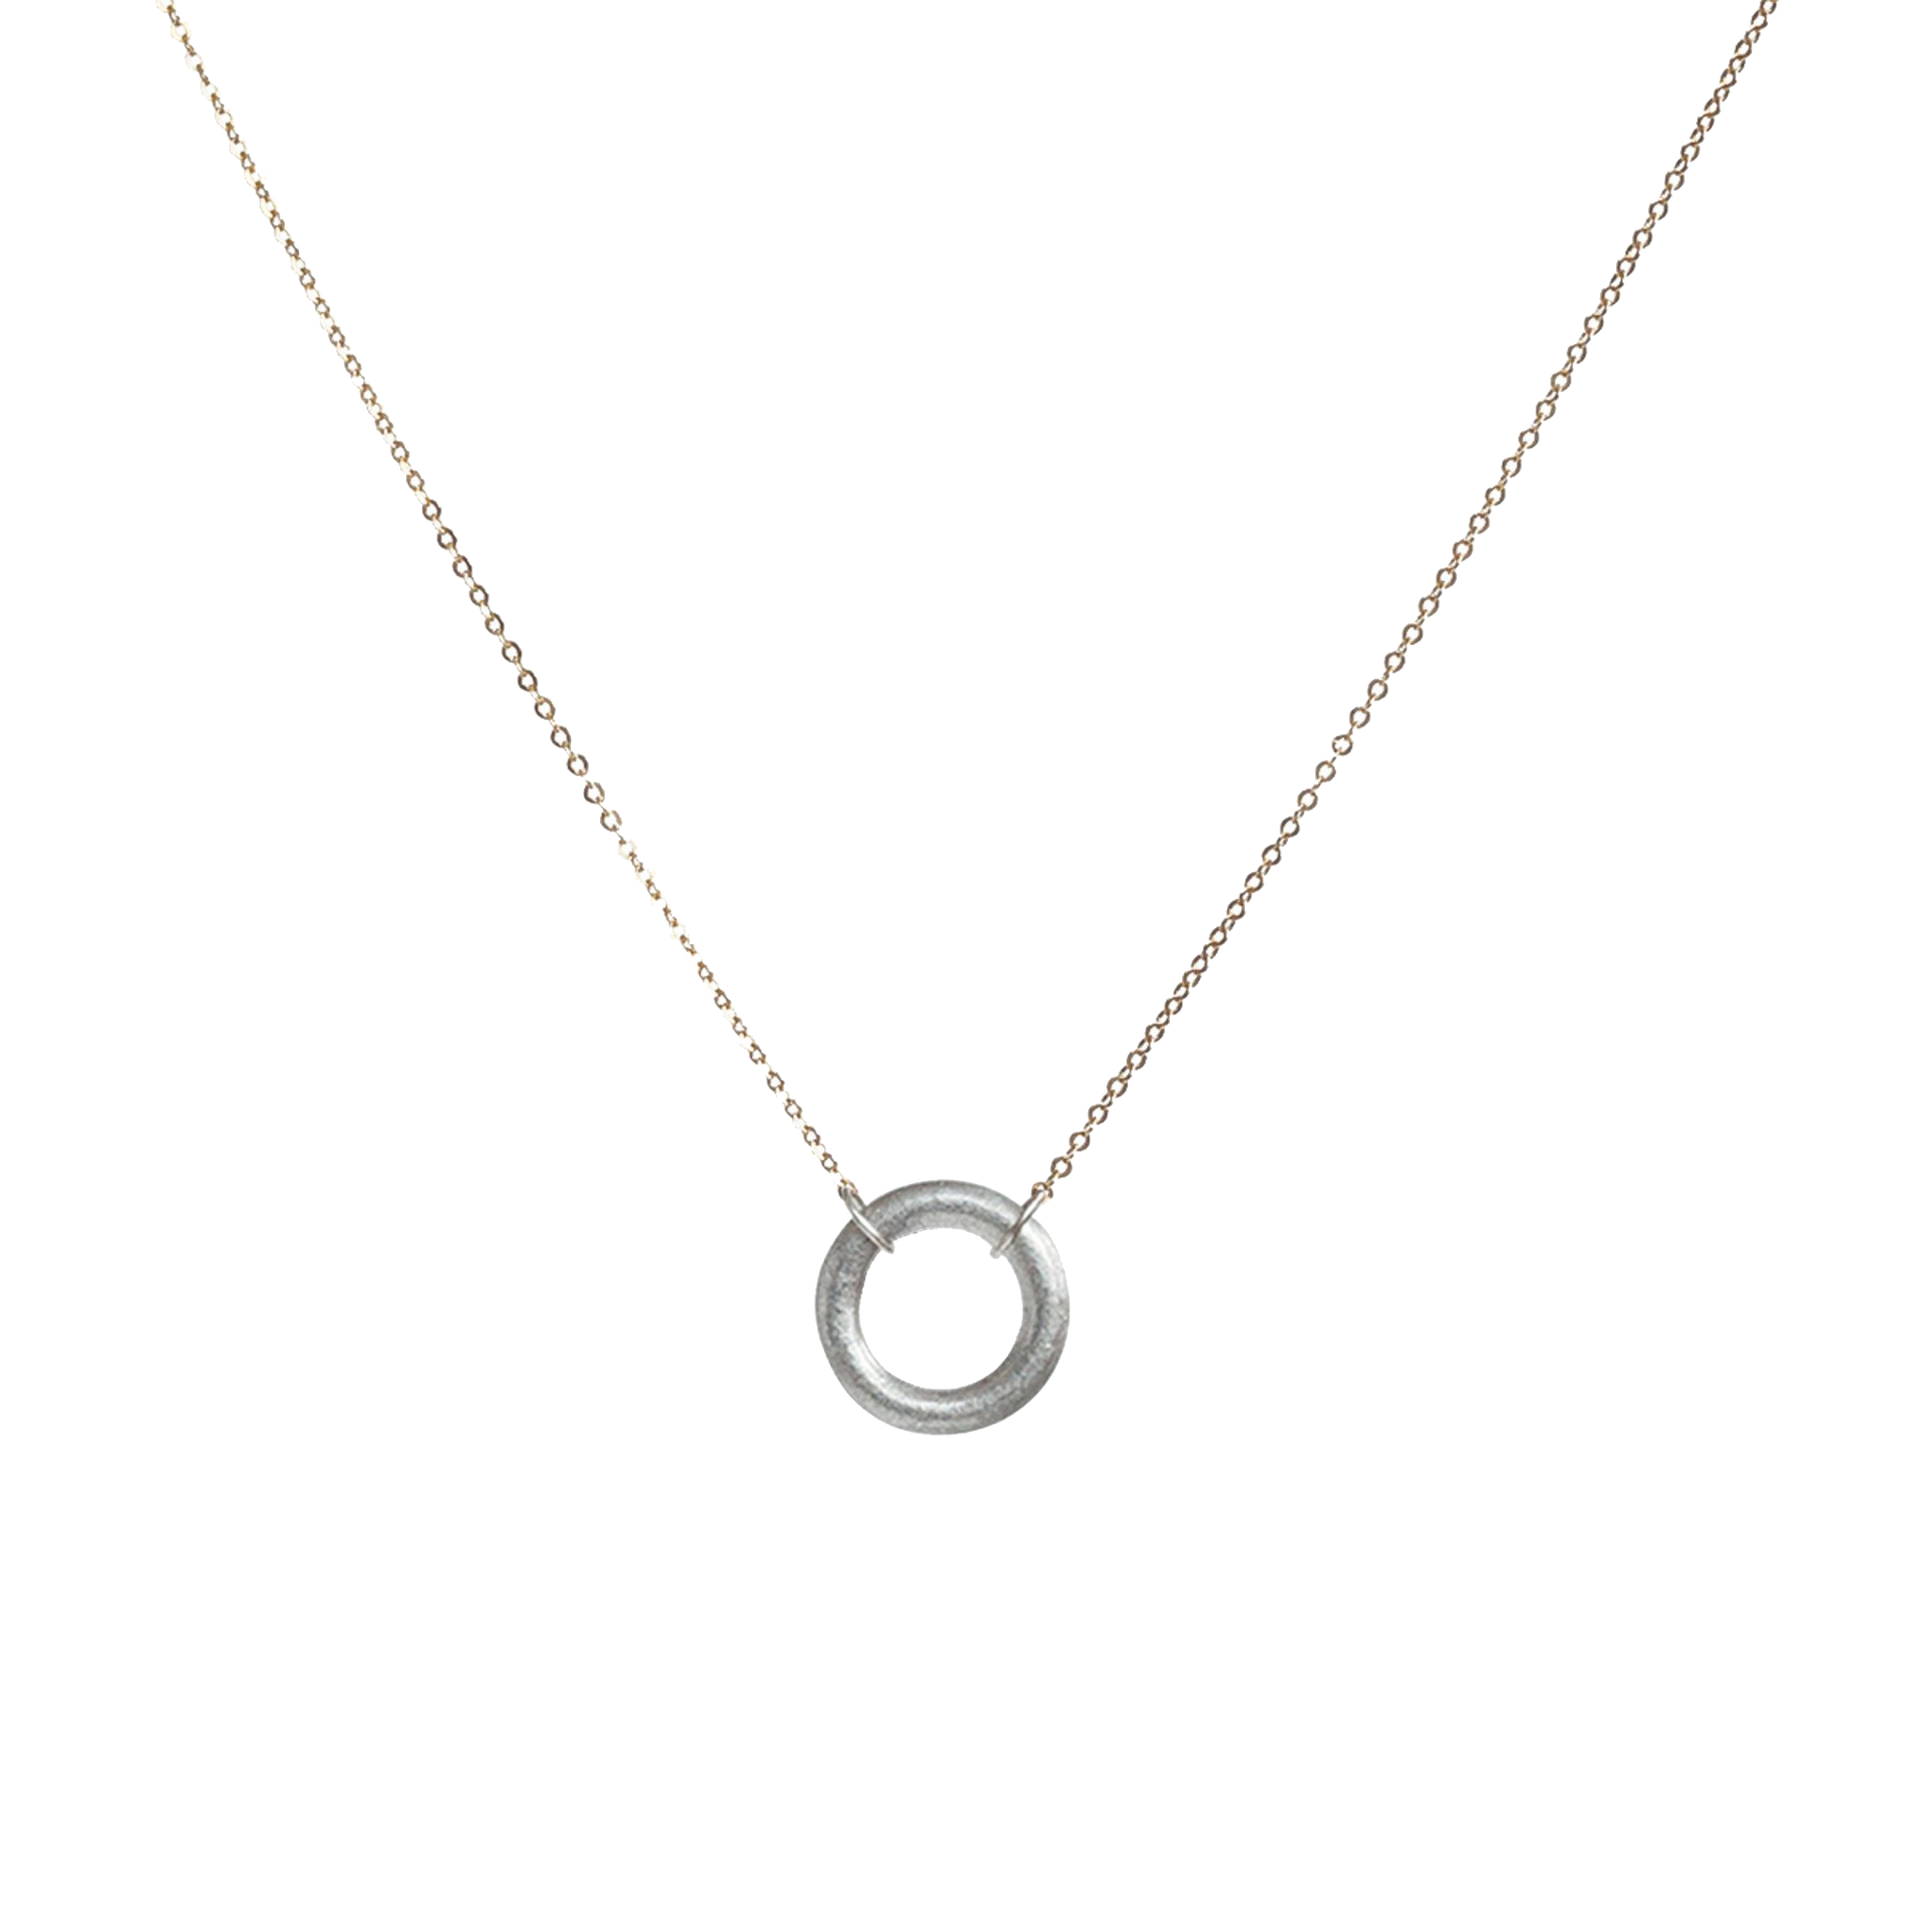 ARTICLE22 Virtuous Full Circle Necklace 14k Gold Chain | necklaces | Australian Jewellery | Jewellery Store | Jewellery shops | Online Jewellery | Gifts | Presents | Xmas Presents | Birthday Present | Wedding Gift | Gold chain | Upcycle Studio